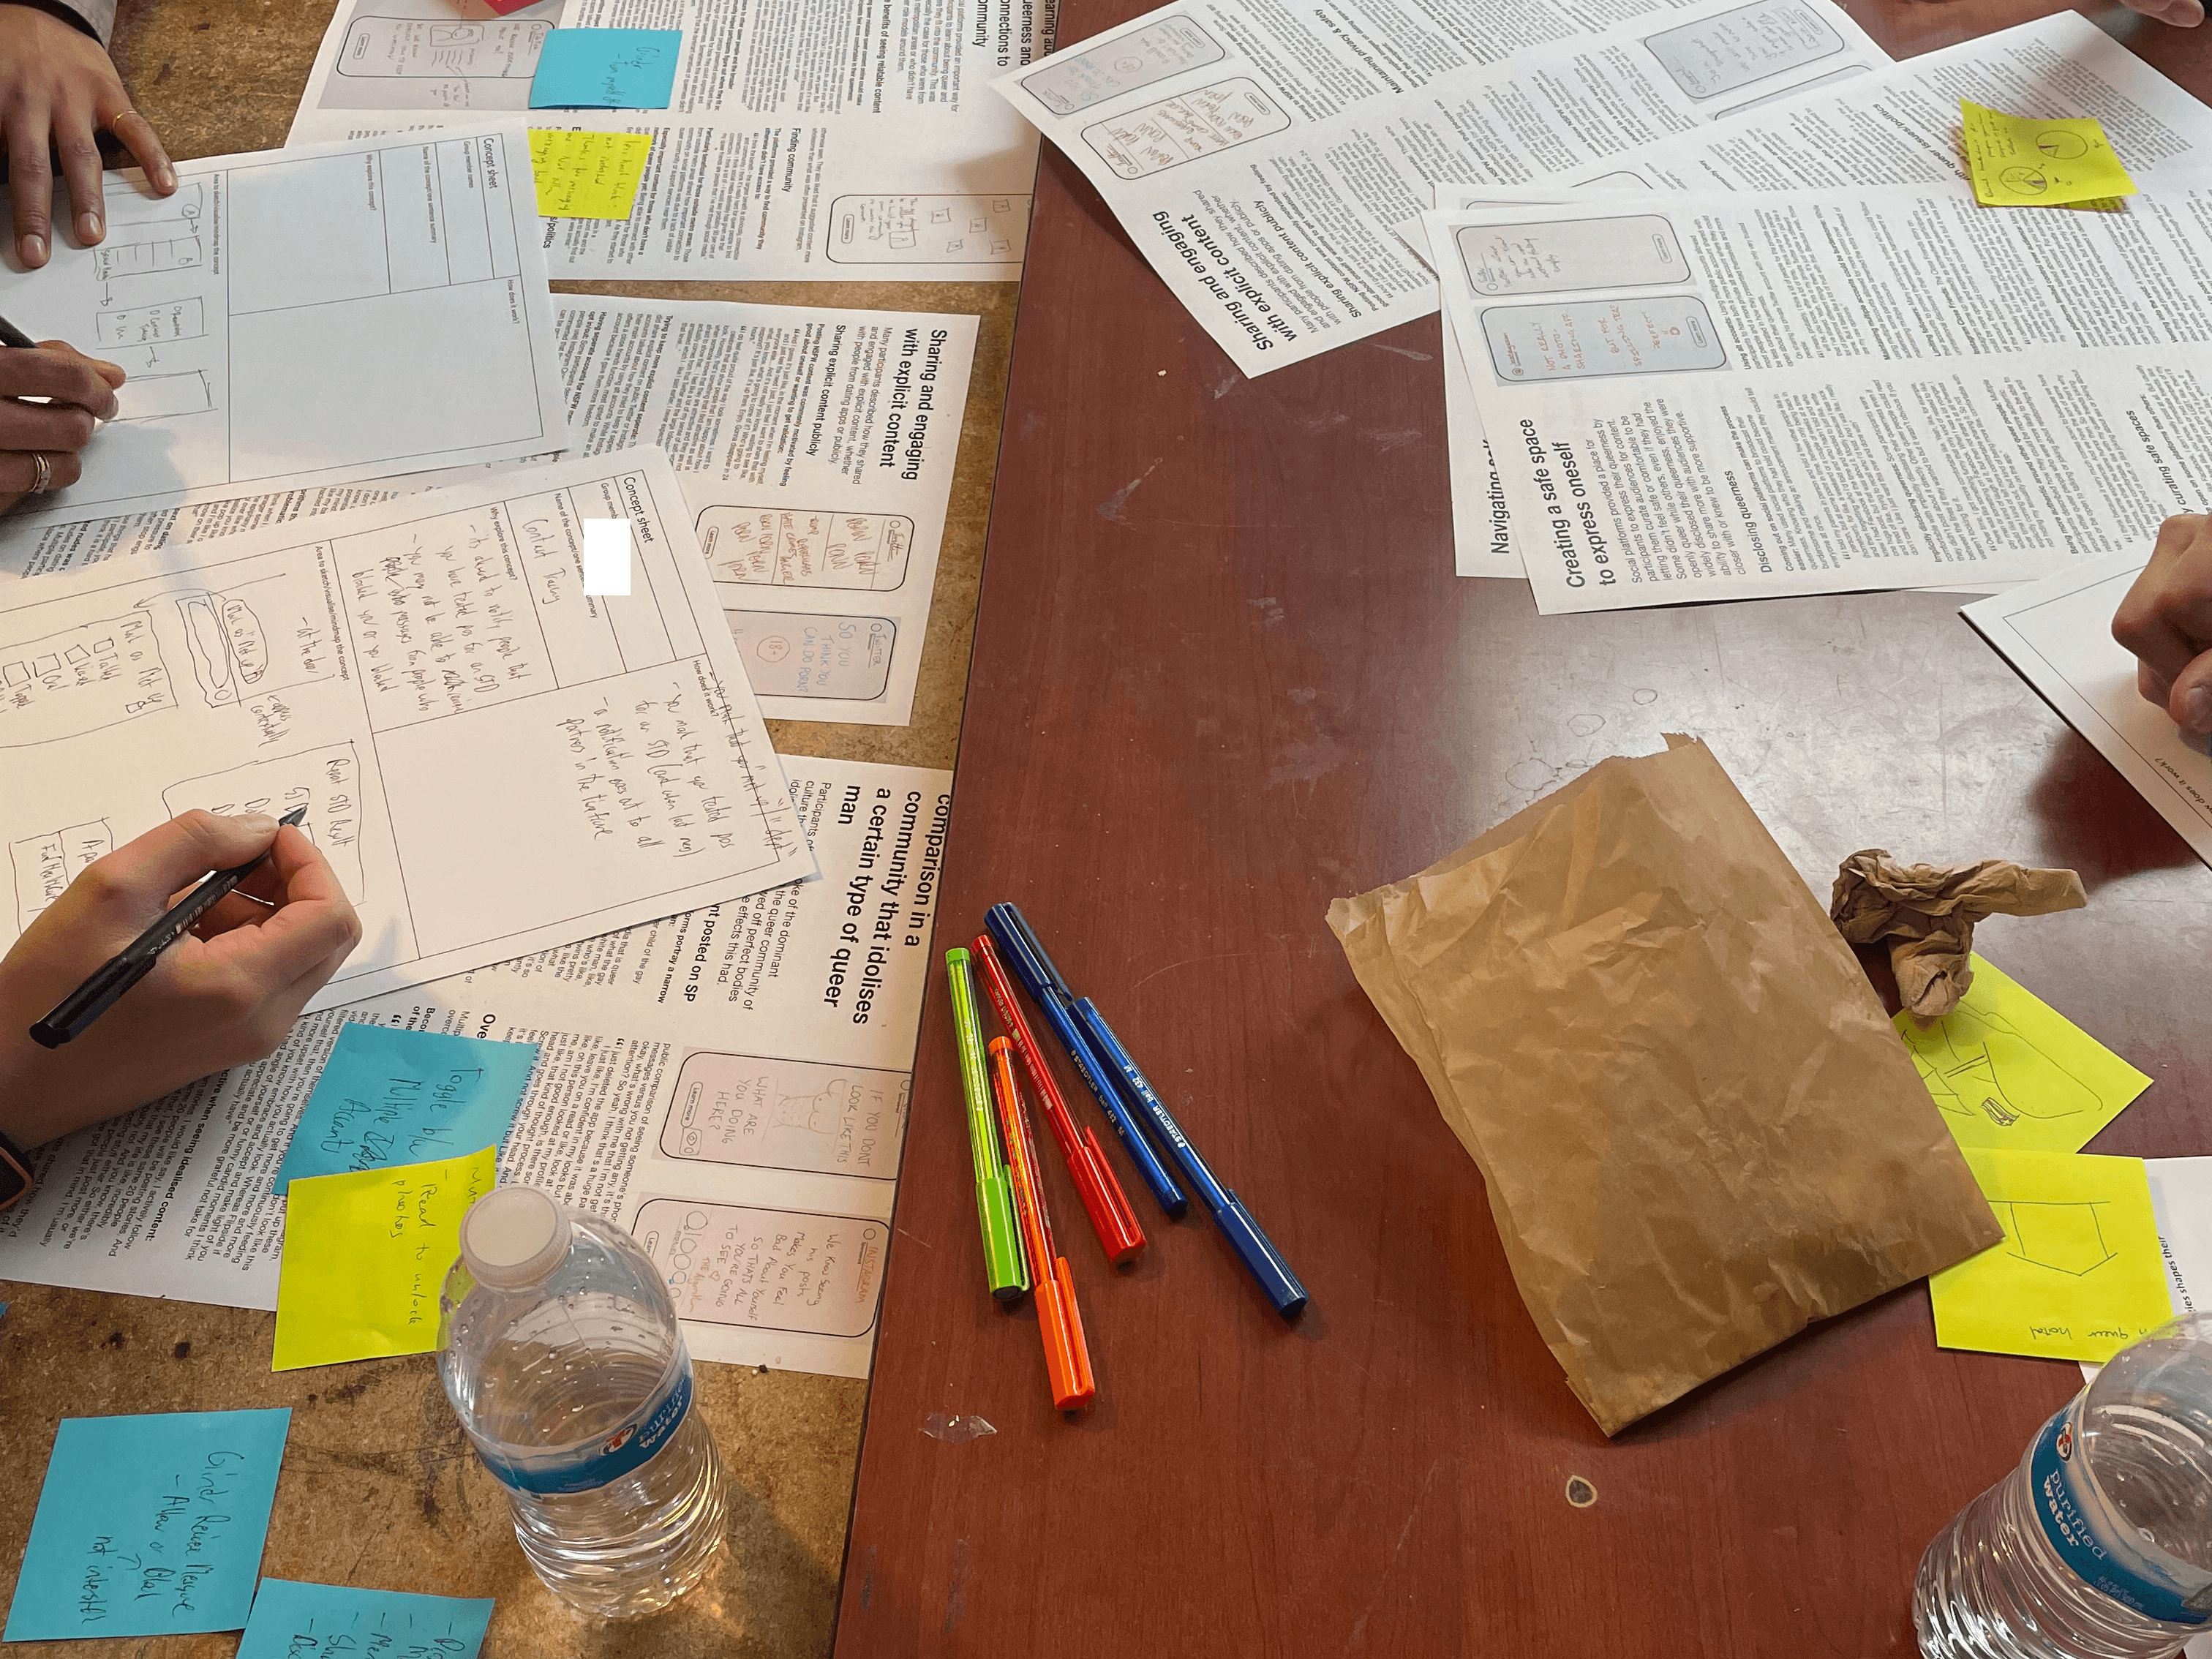 Looking down at a table that has worksheets and findings posters on it. The hands of participants writing are visible.